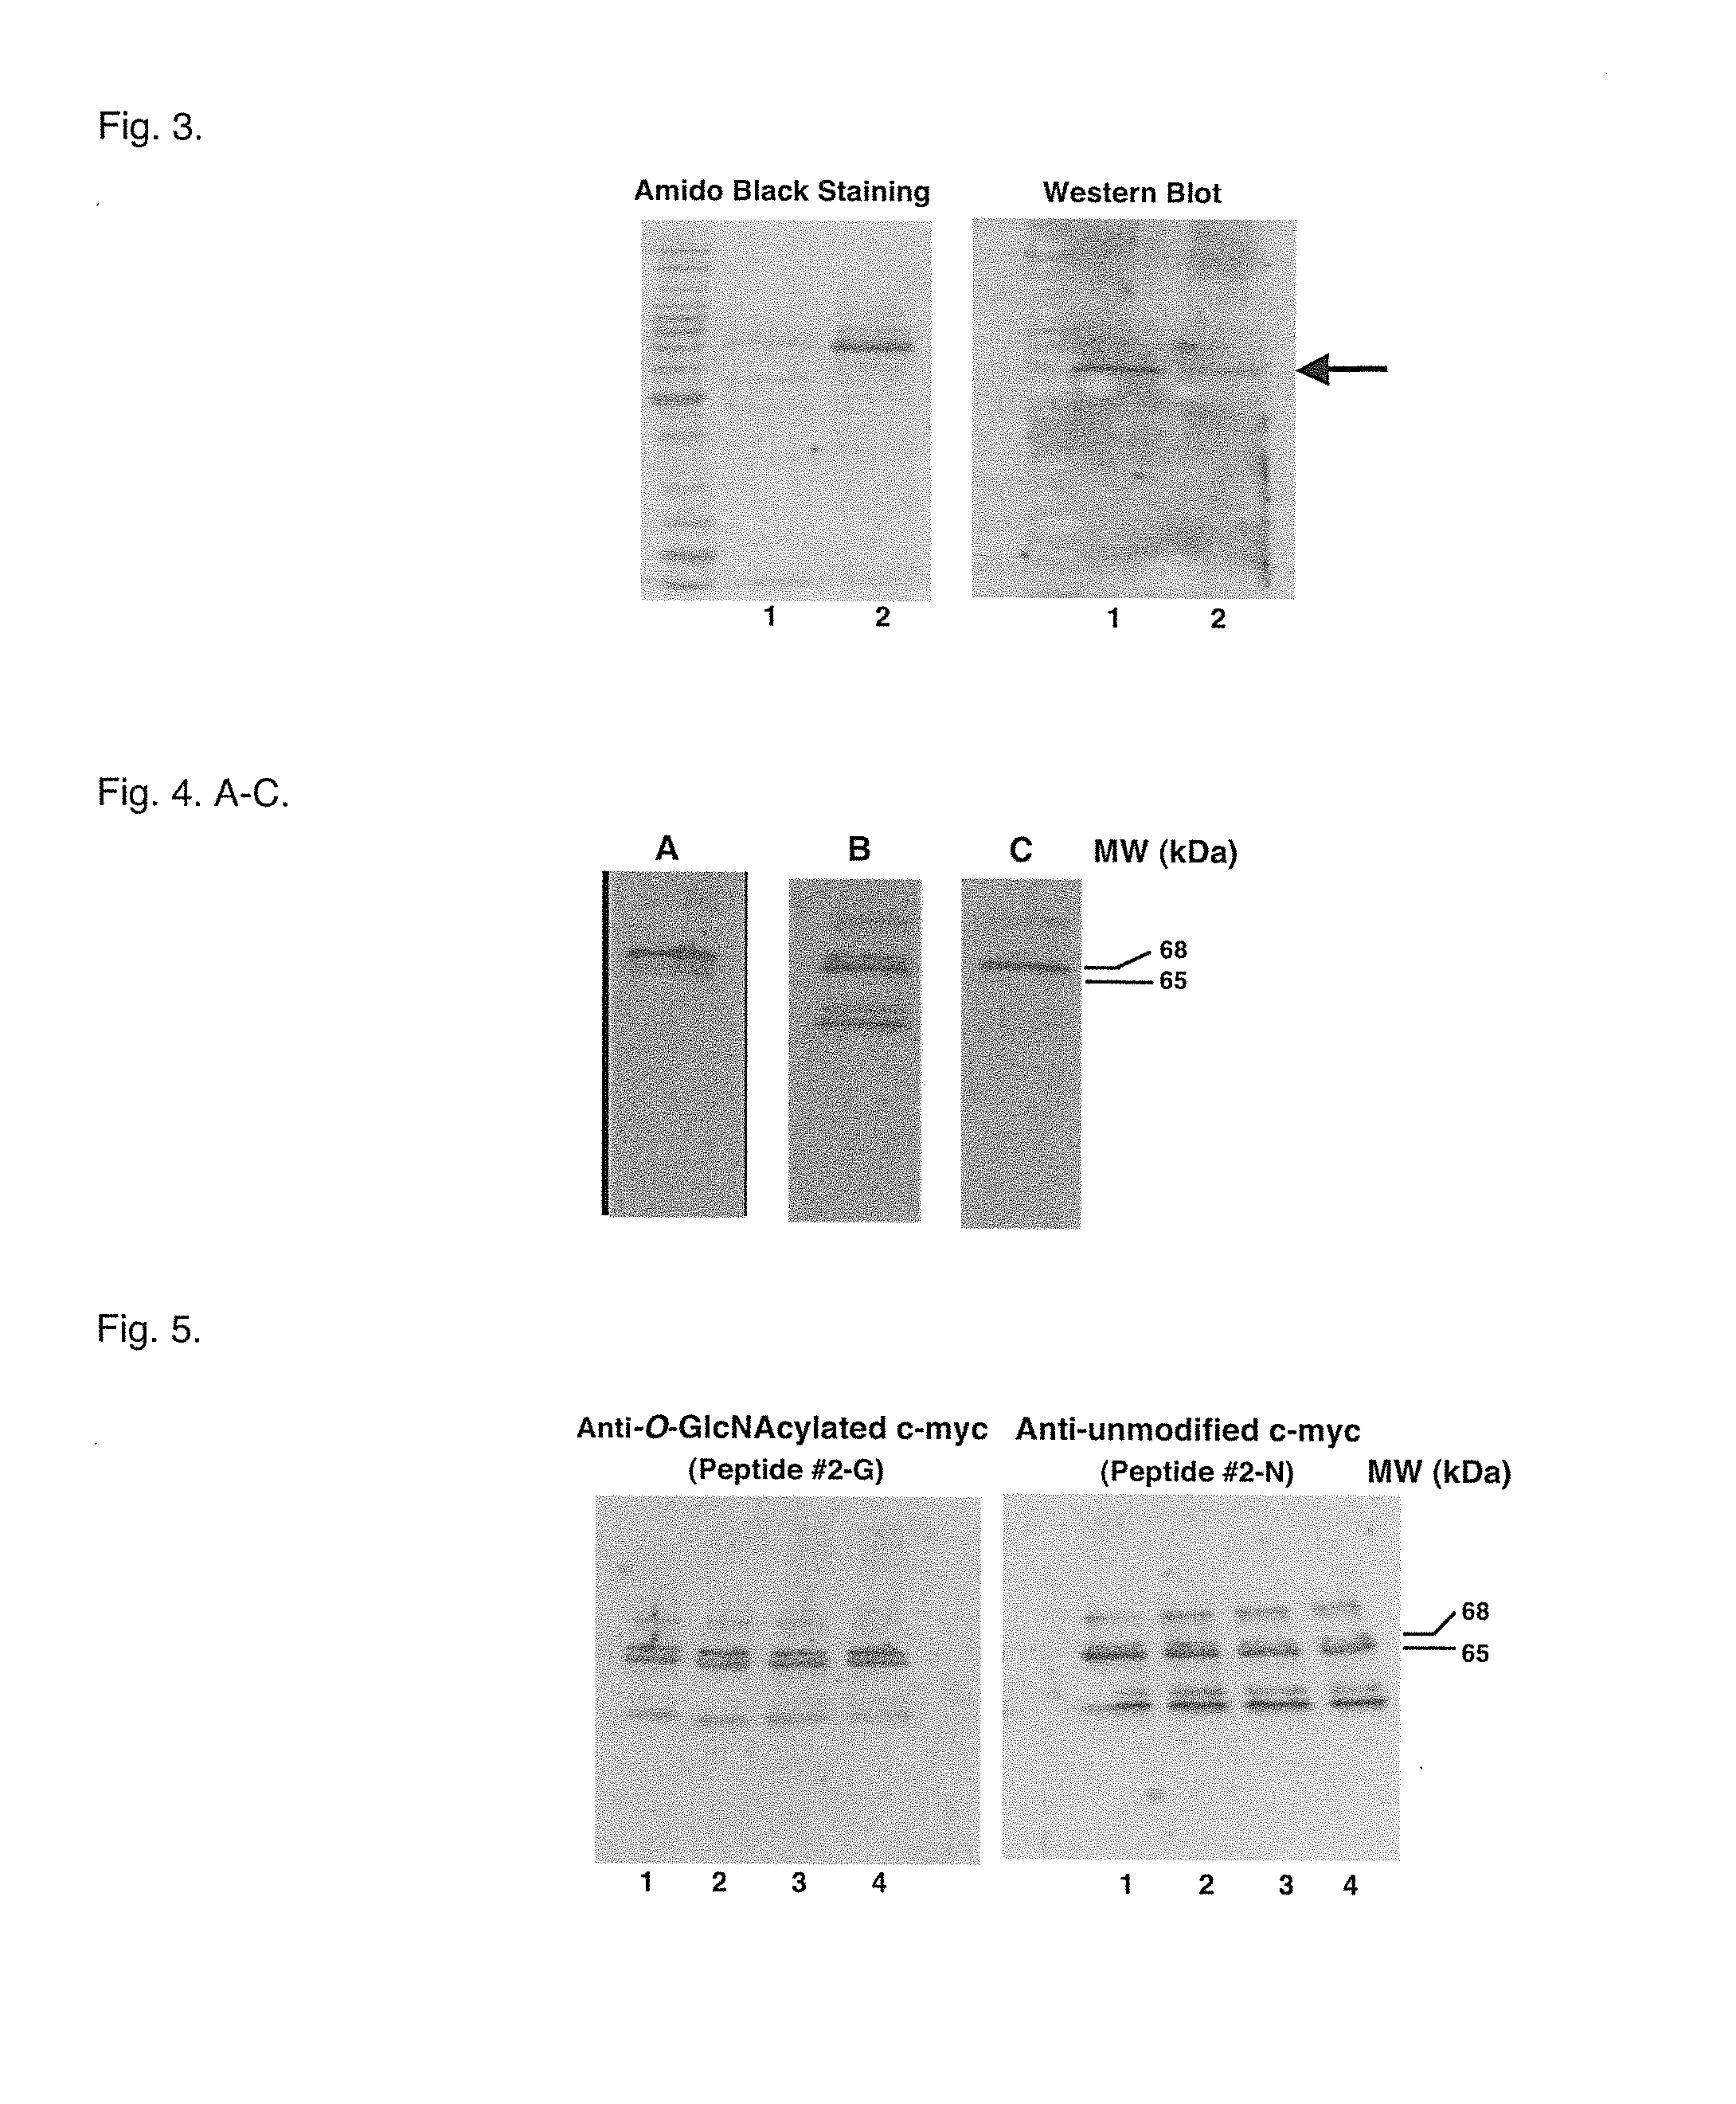 Glycosylation site-specific antibodies and Anti-cancer compounds